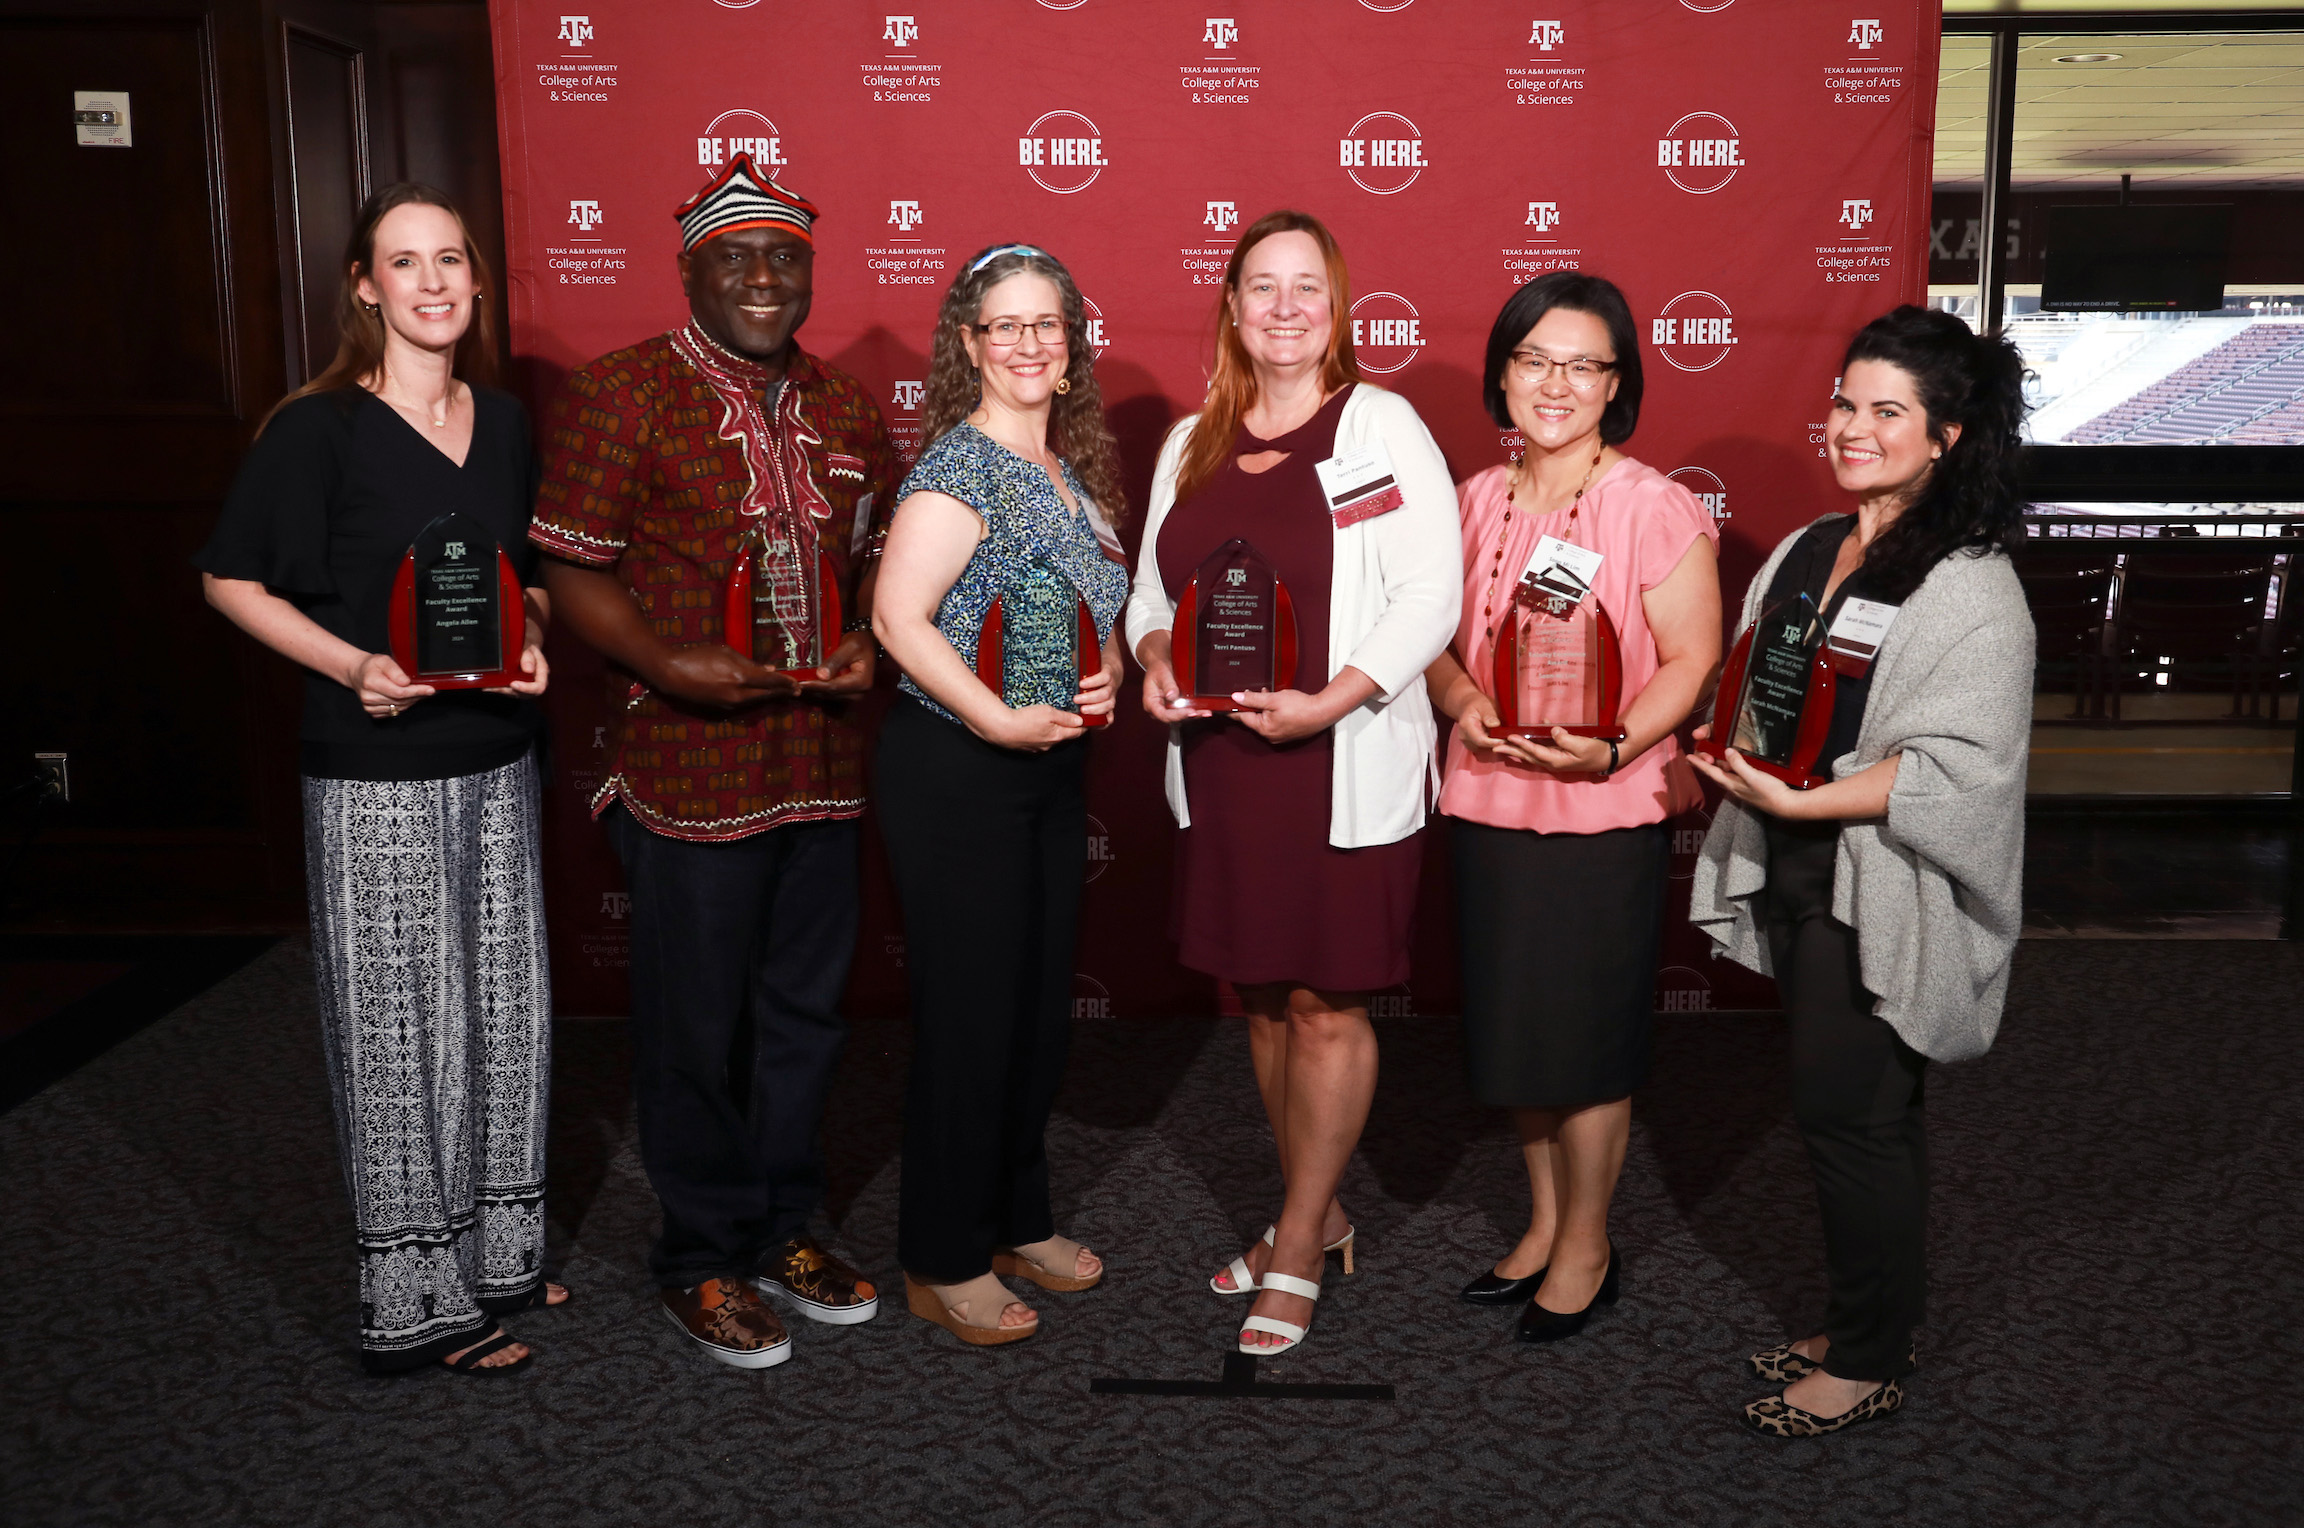 Group photograph of the six recipients of 2024 College of Arts and Sciences Faculty Excellence Awards, posing with their plaques in front of a maroon backdrop featuring the college logo and the "Be Here" stamp in white